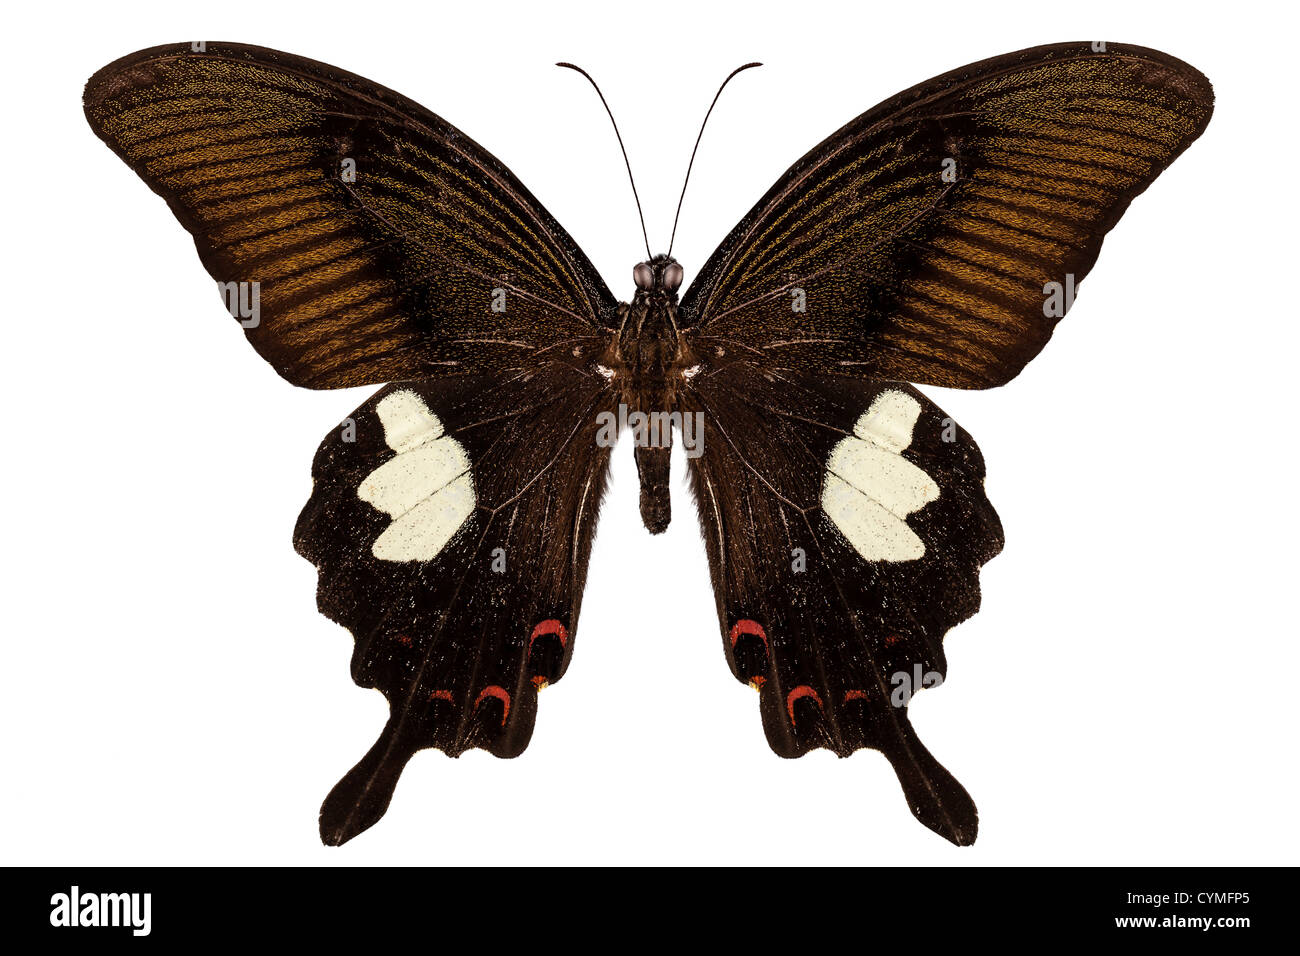 Black and brown butterfly species Papilio nephelus isolated on white background Stock Photo